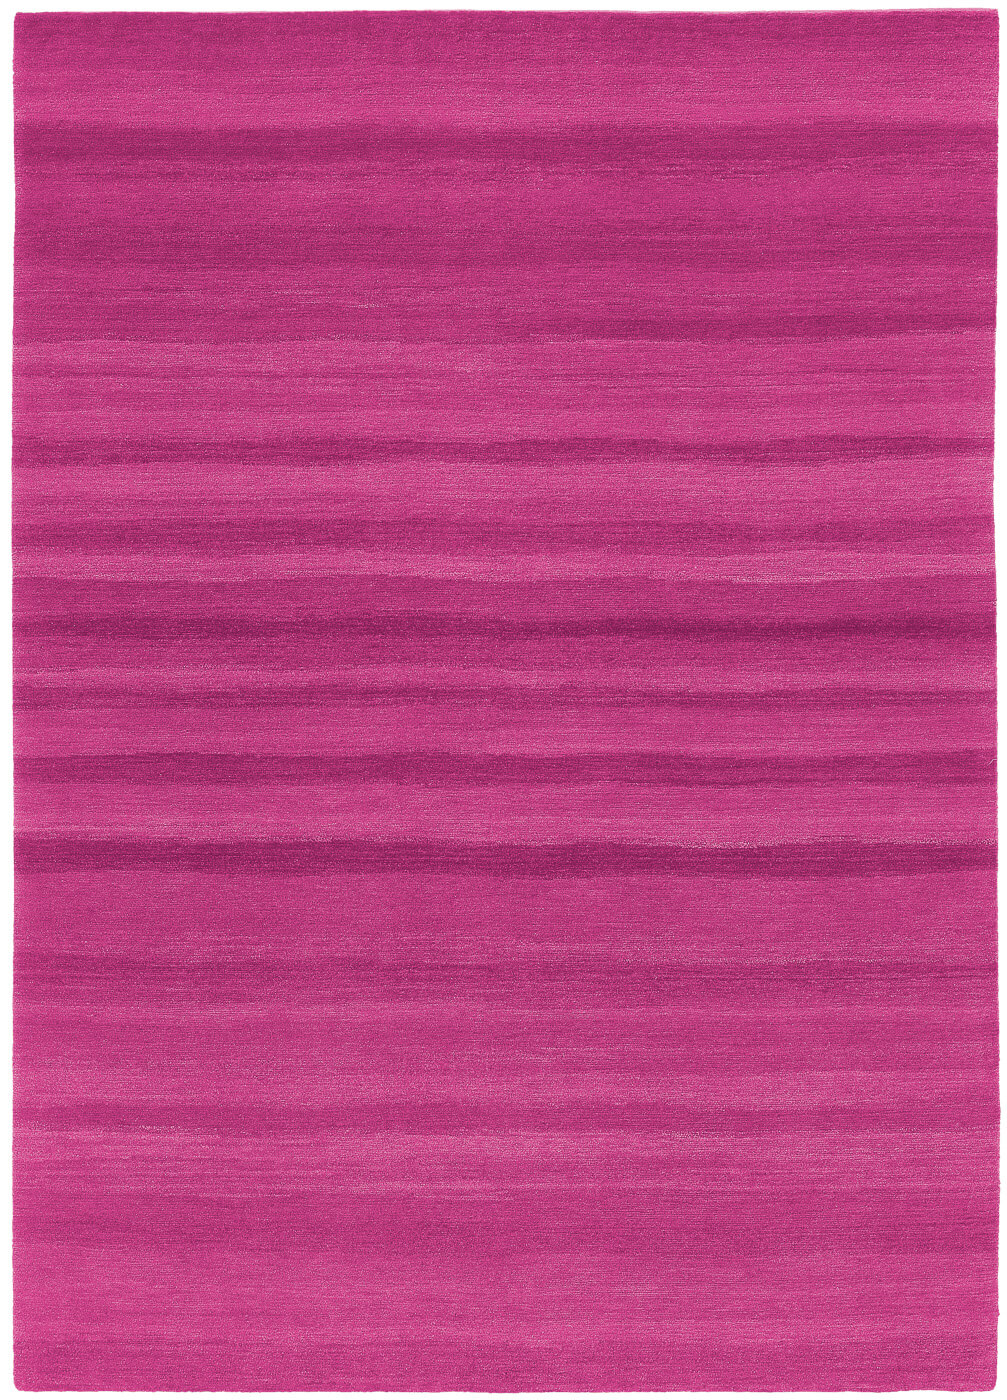 Hand-woven Pink Stripes Luxury Rug ☞ Size: 250 x 300 cm